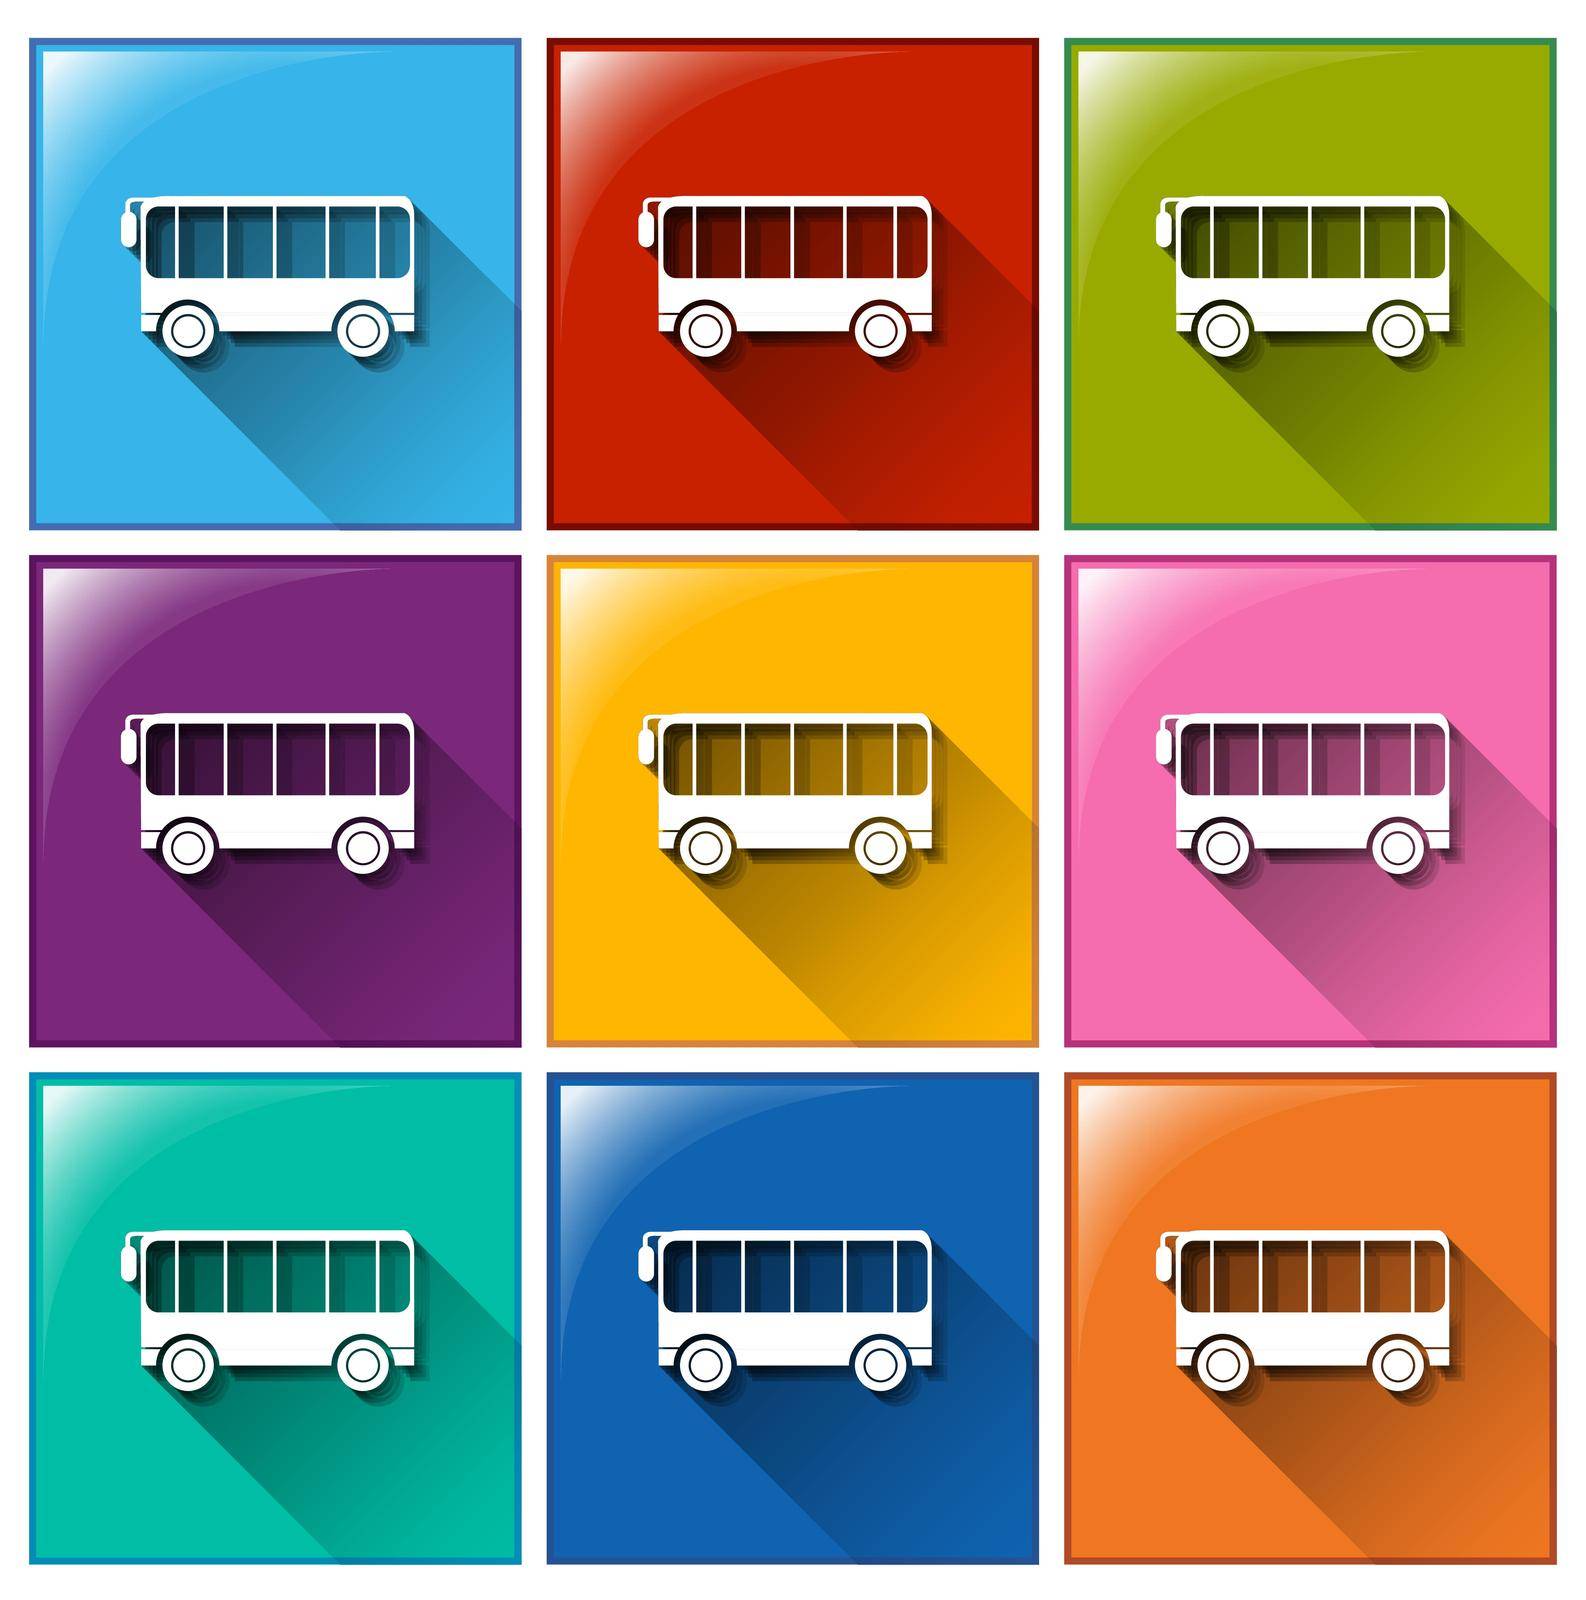 Square buttons with vehicles by iimages